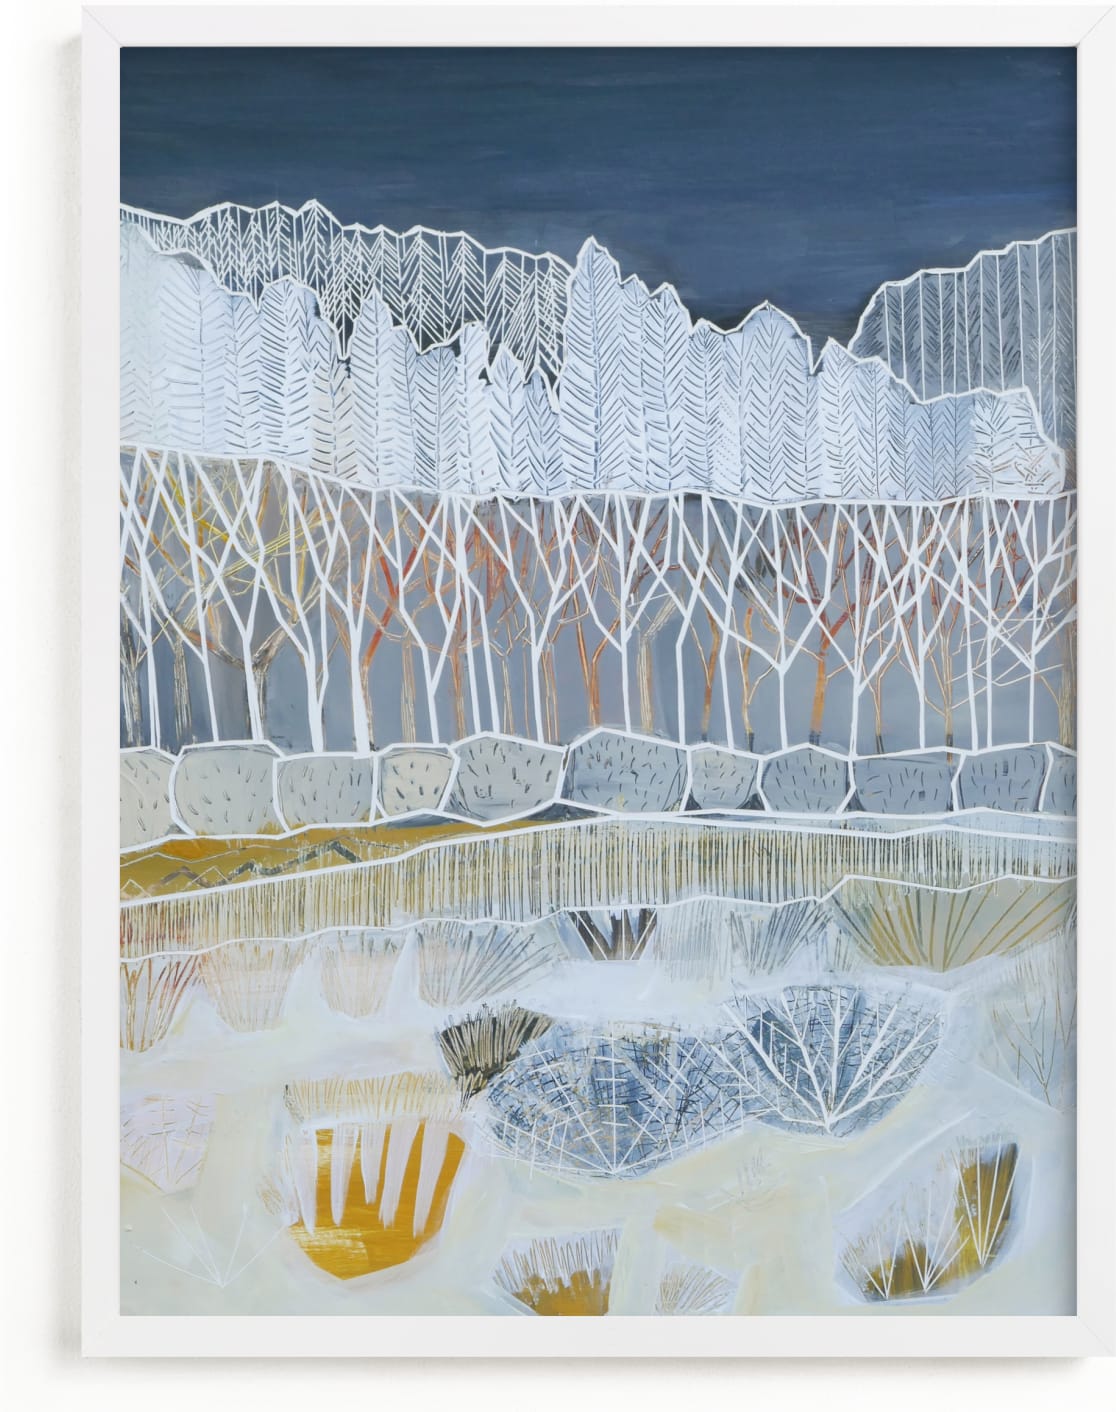 This is a blue art by Sarah Fitzgerald called White Woods.